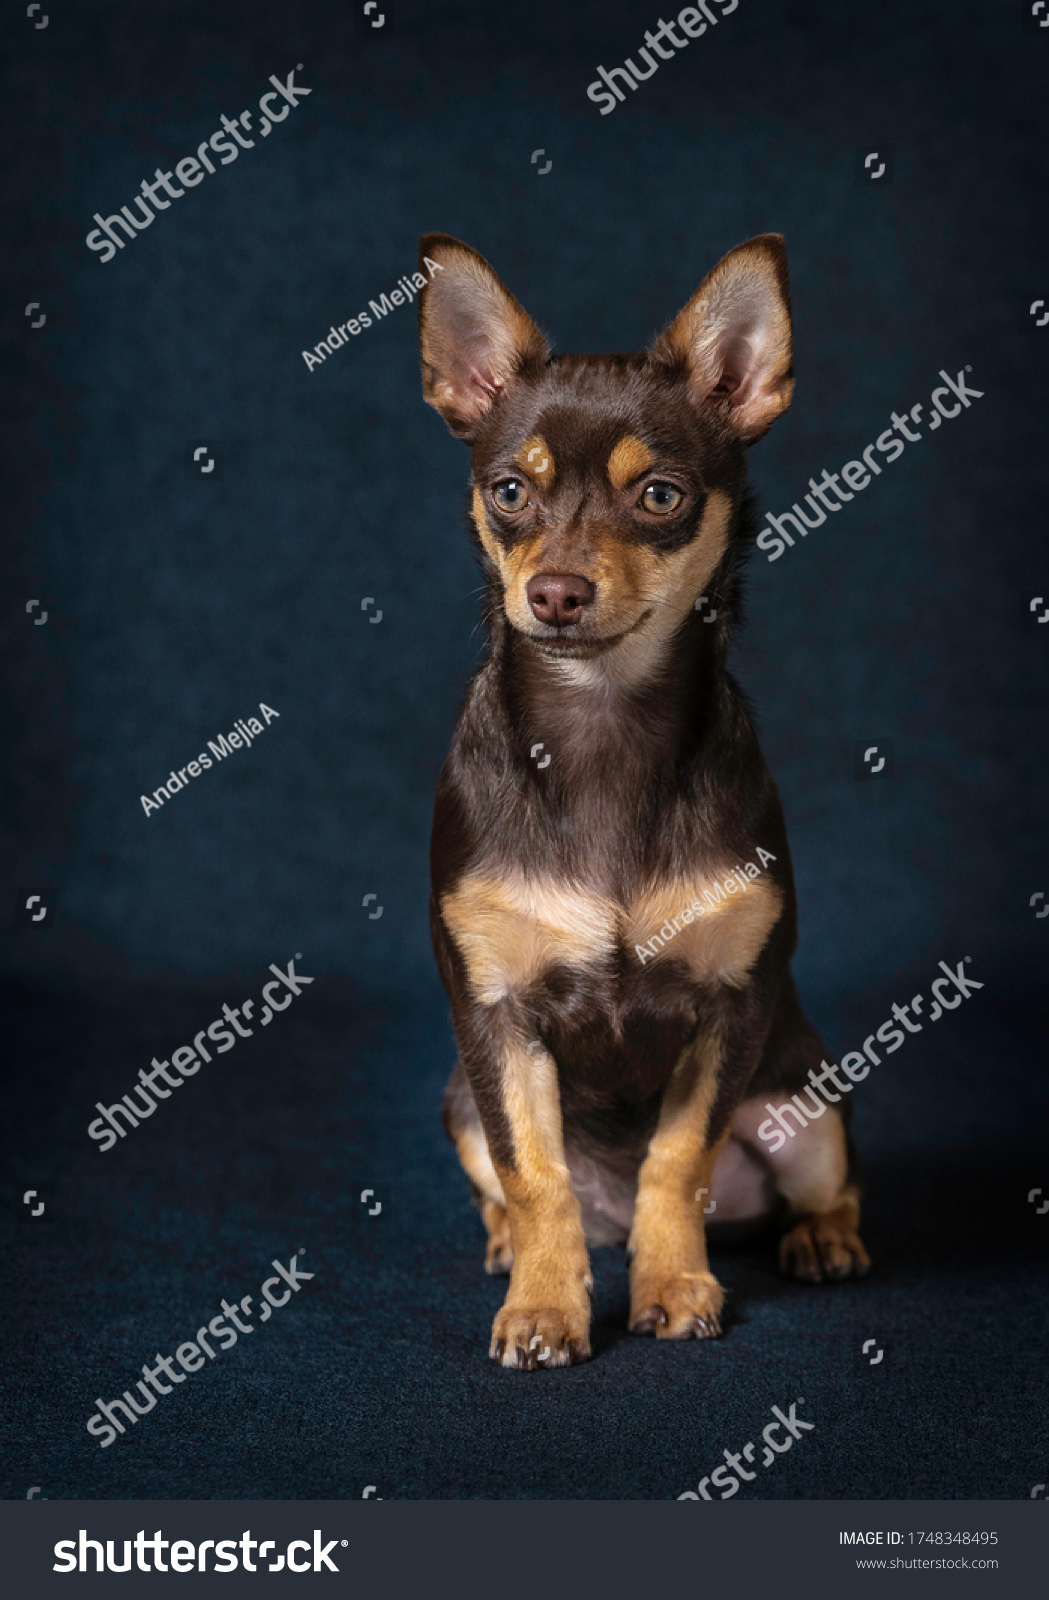 Stock Photo Chihuahua Dog Are Faithful And Very Good Company To Have Them In Small Houses 1748348495 